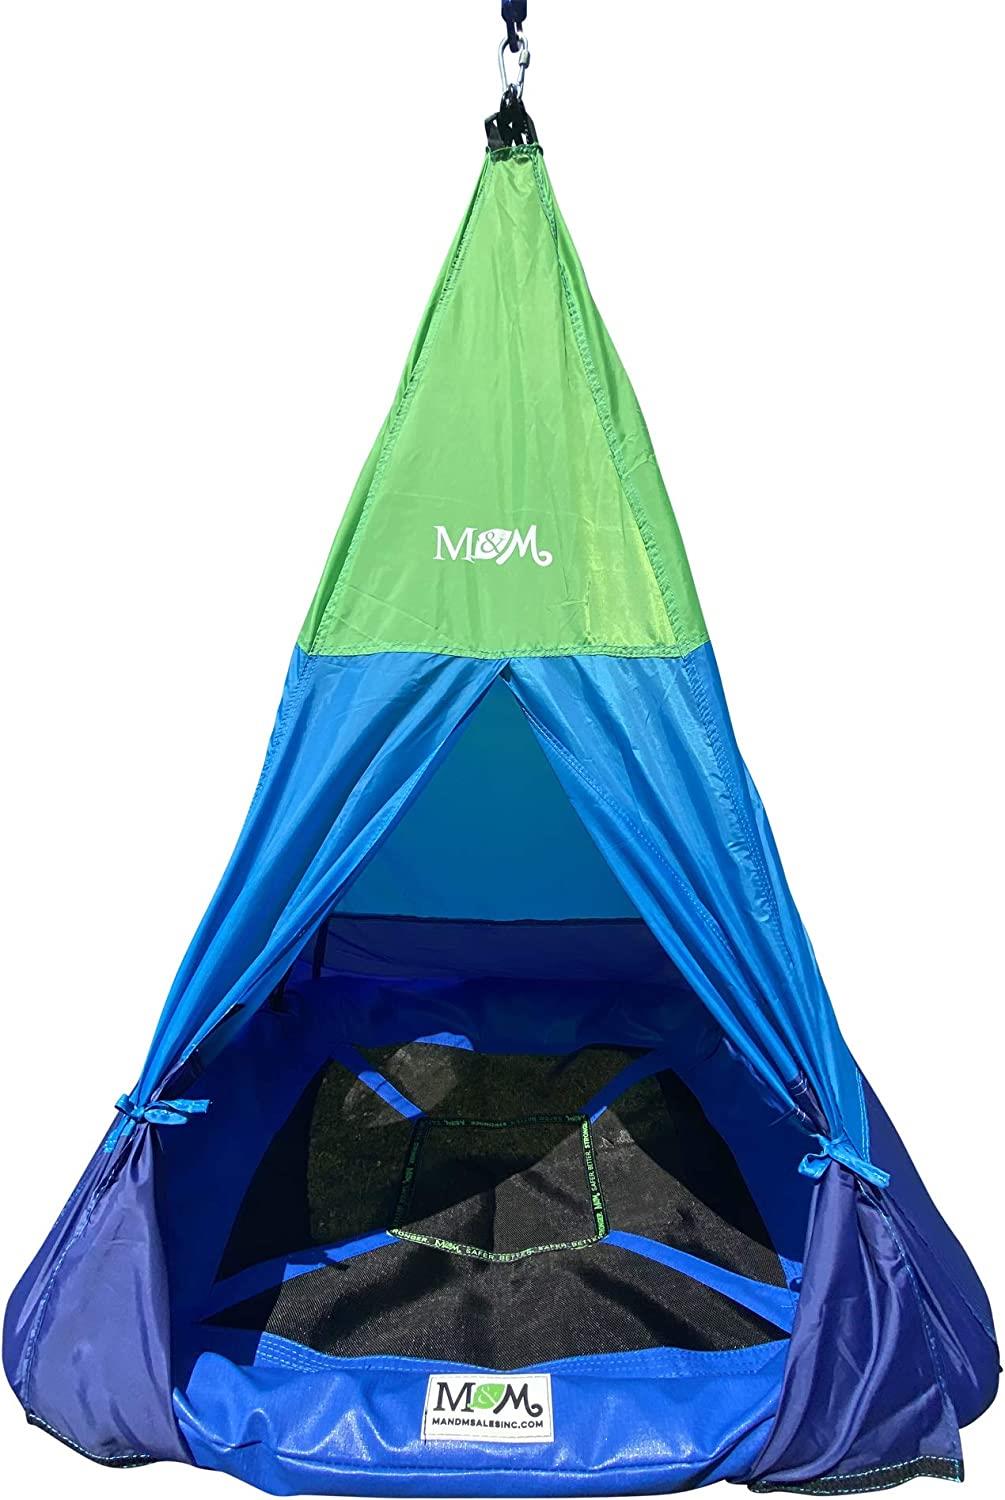 Outdoor Teepee Tent Swing, 40in Textilene Platform Swing, Colorful Detachable Tent, Hanging Tree Fort, 250 Lbs., Single or Multi-Rider, Swing and Spin.